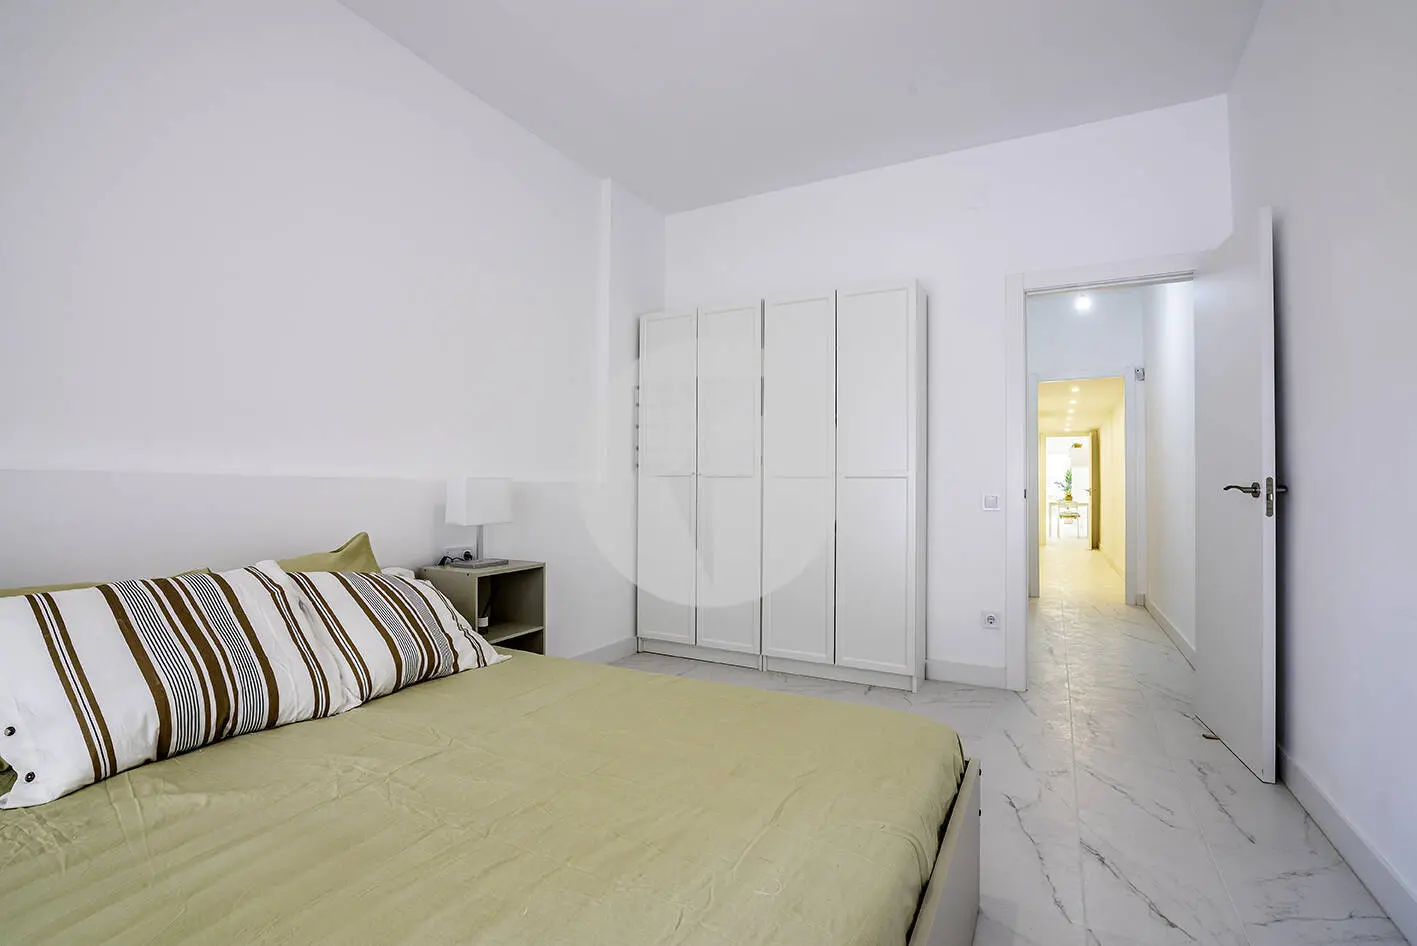 Brand new completely renovated apartment on Aragó street in the heart of El Clot in Barcelona. 33